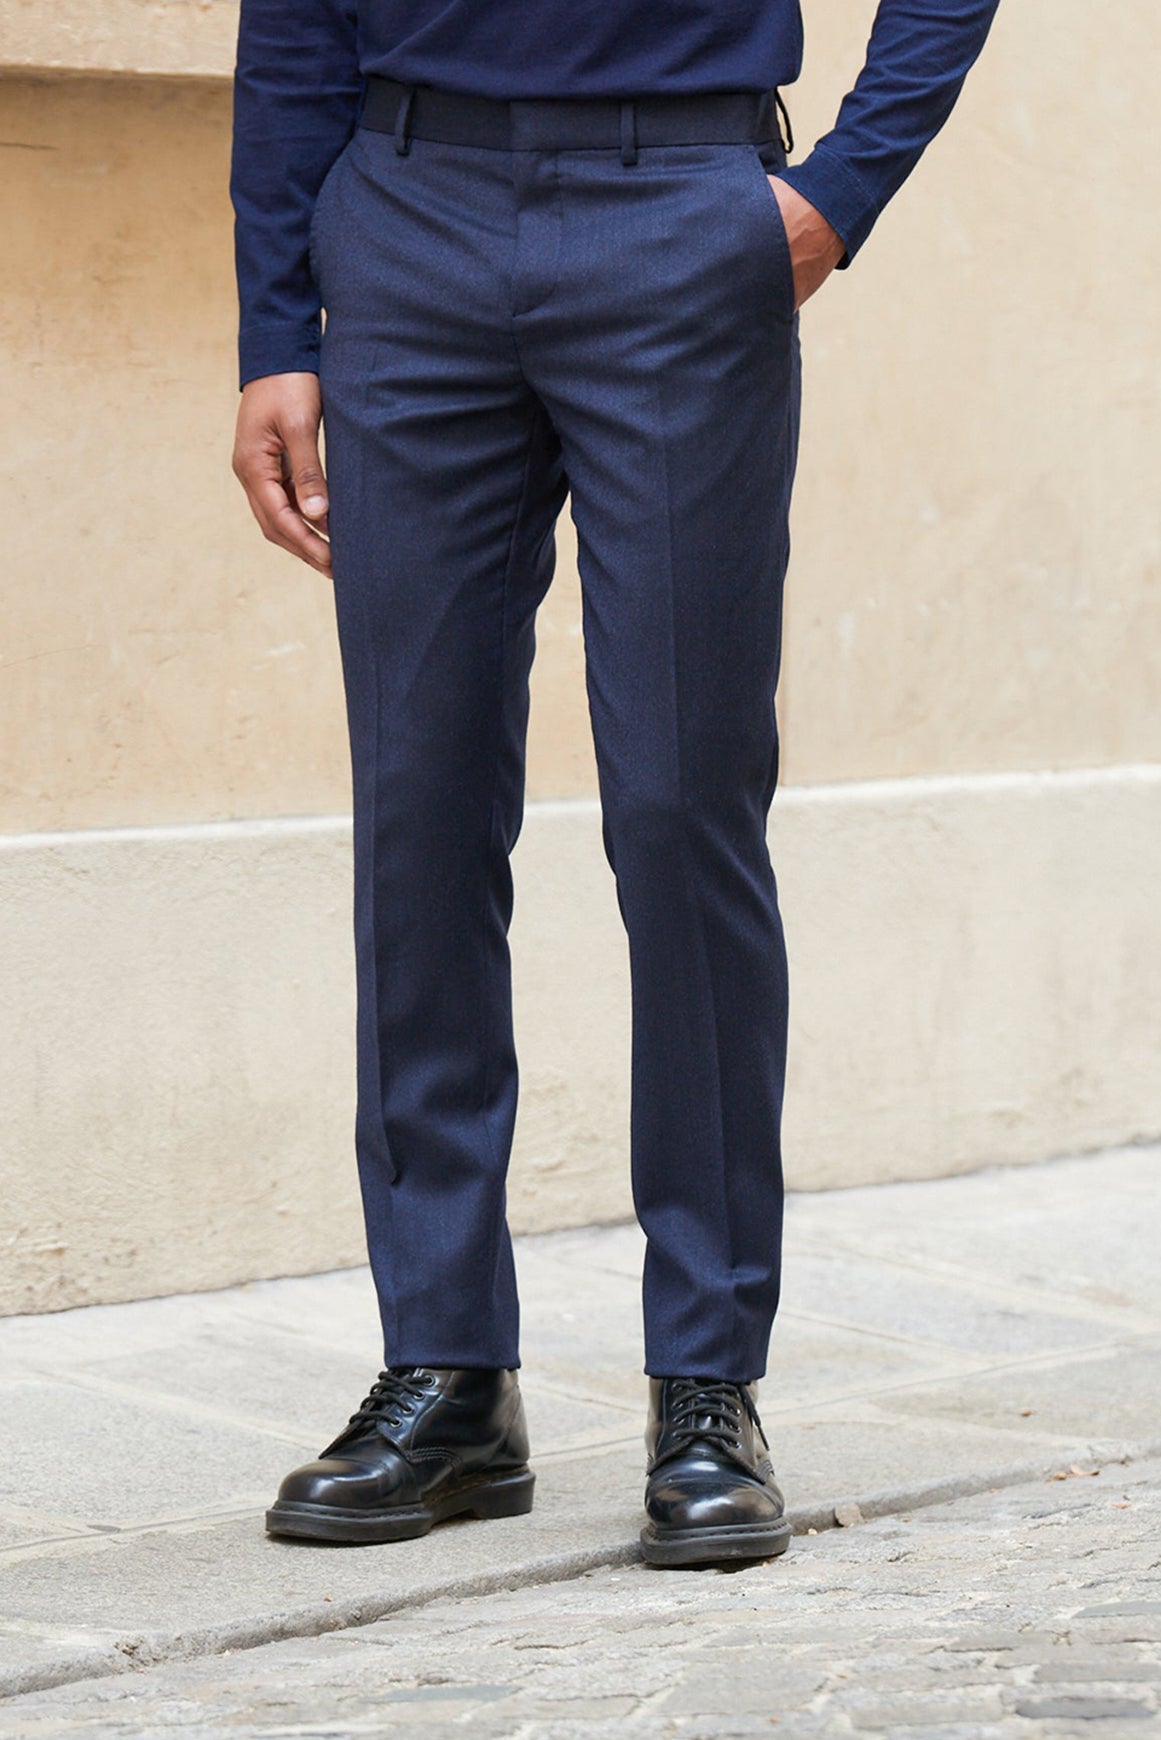 COURCELLES Pants - Navy